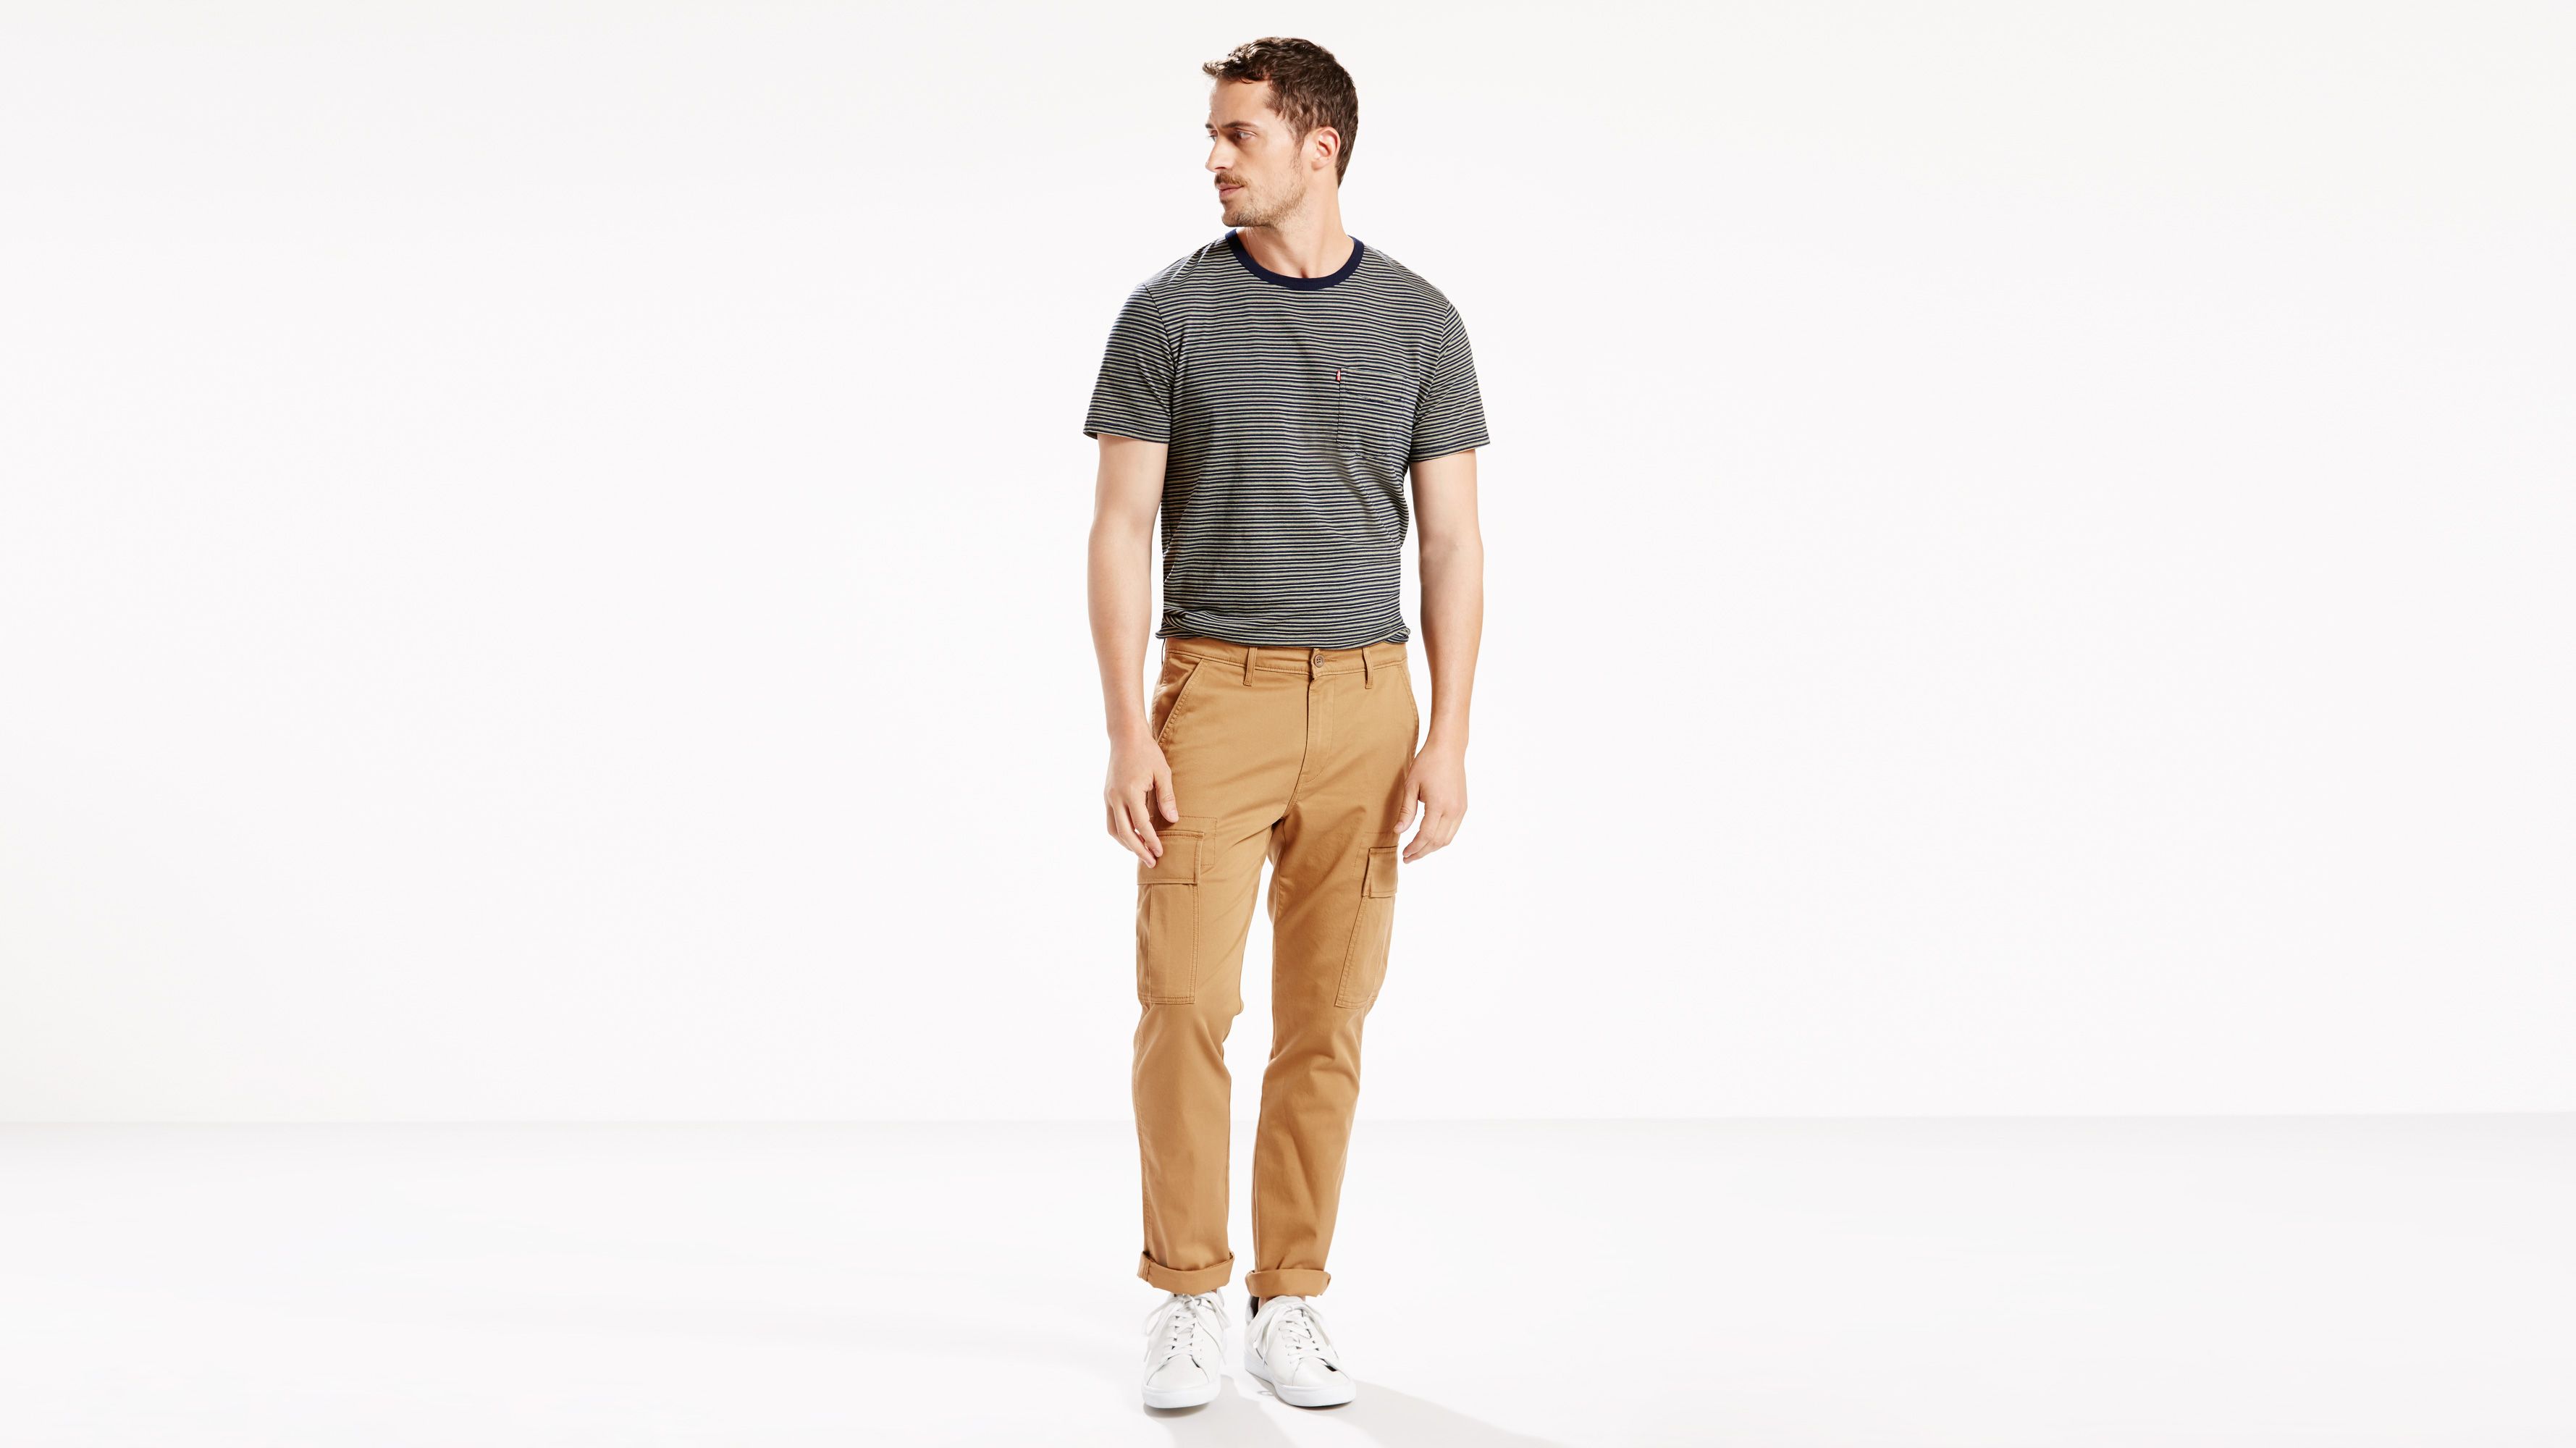 athletic fit cargo pants